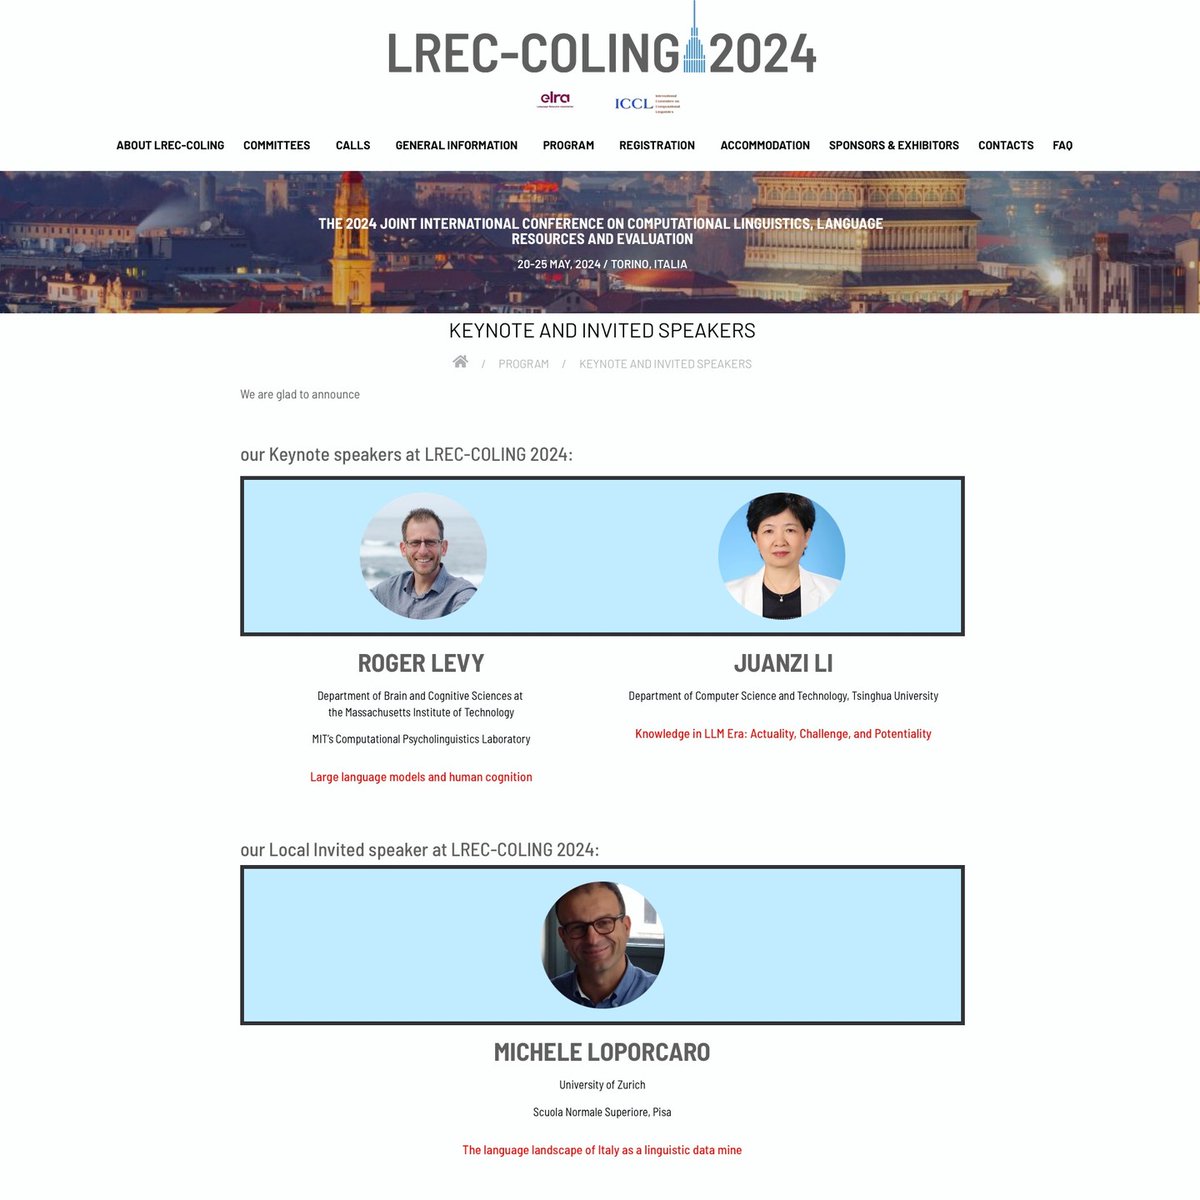 We are delighted to introduce our amazing lineup of invited speakers for LREC-COLING 2024! 🌟 lrec-coling-2024.org/keynote-and-in… Stay tuned as we reveal sneak peeks about their talks over the next few days. #NLProc @knmnyn @NicolettaCZ